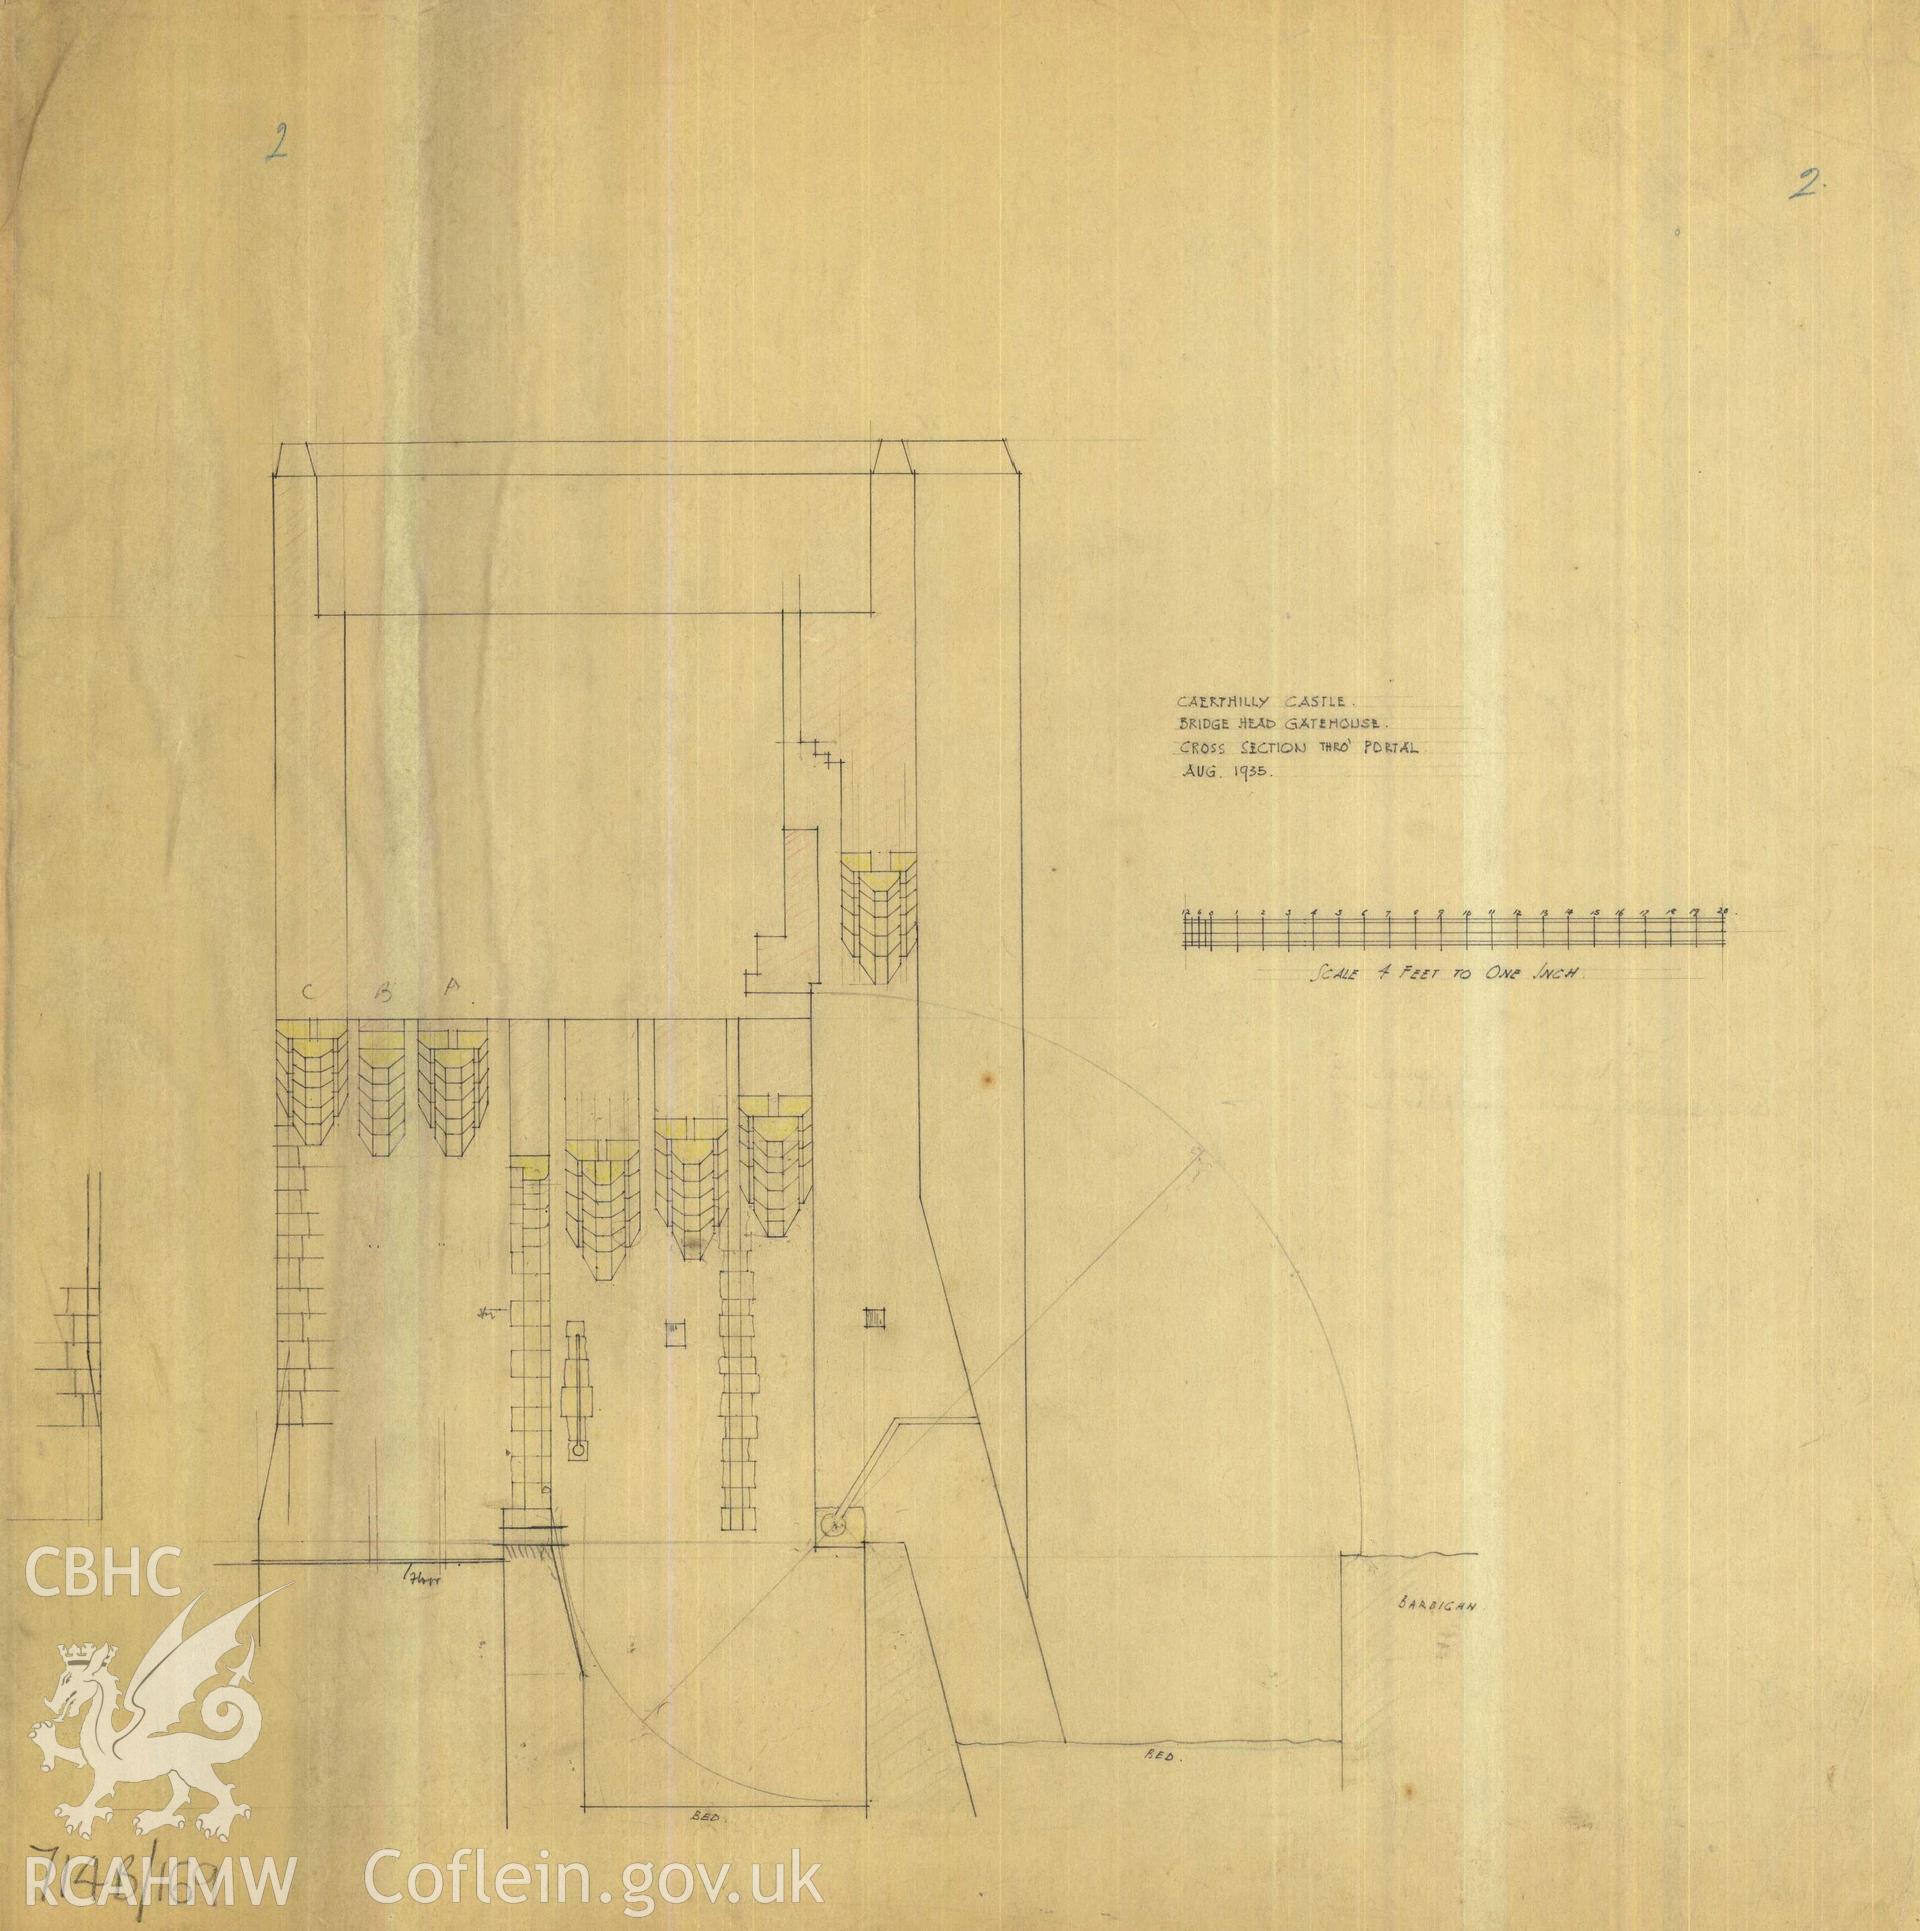 Cadw guardianship monument drawing of Caerphilly Castle. Dam, S gate, section, recons (i). Cadw Ref. No:714B/169. Scale 1:48.